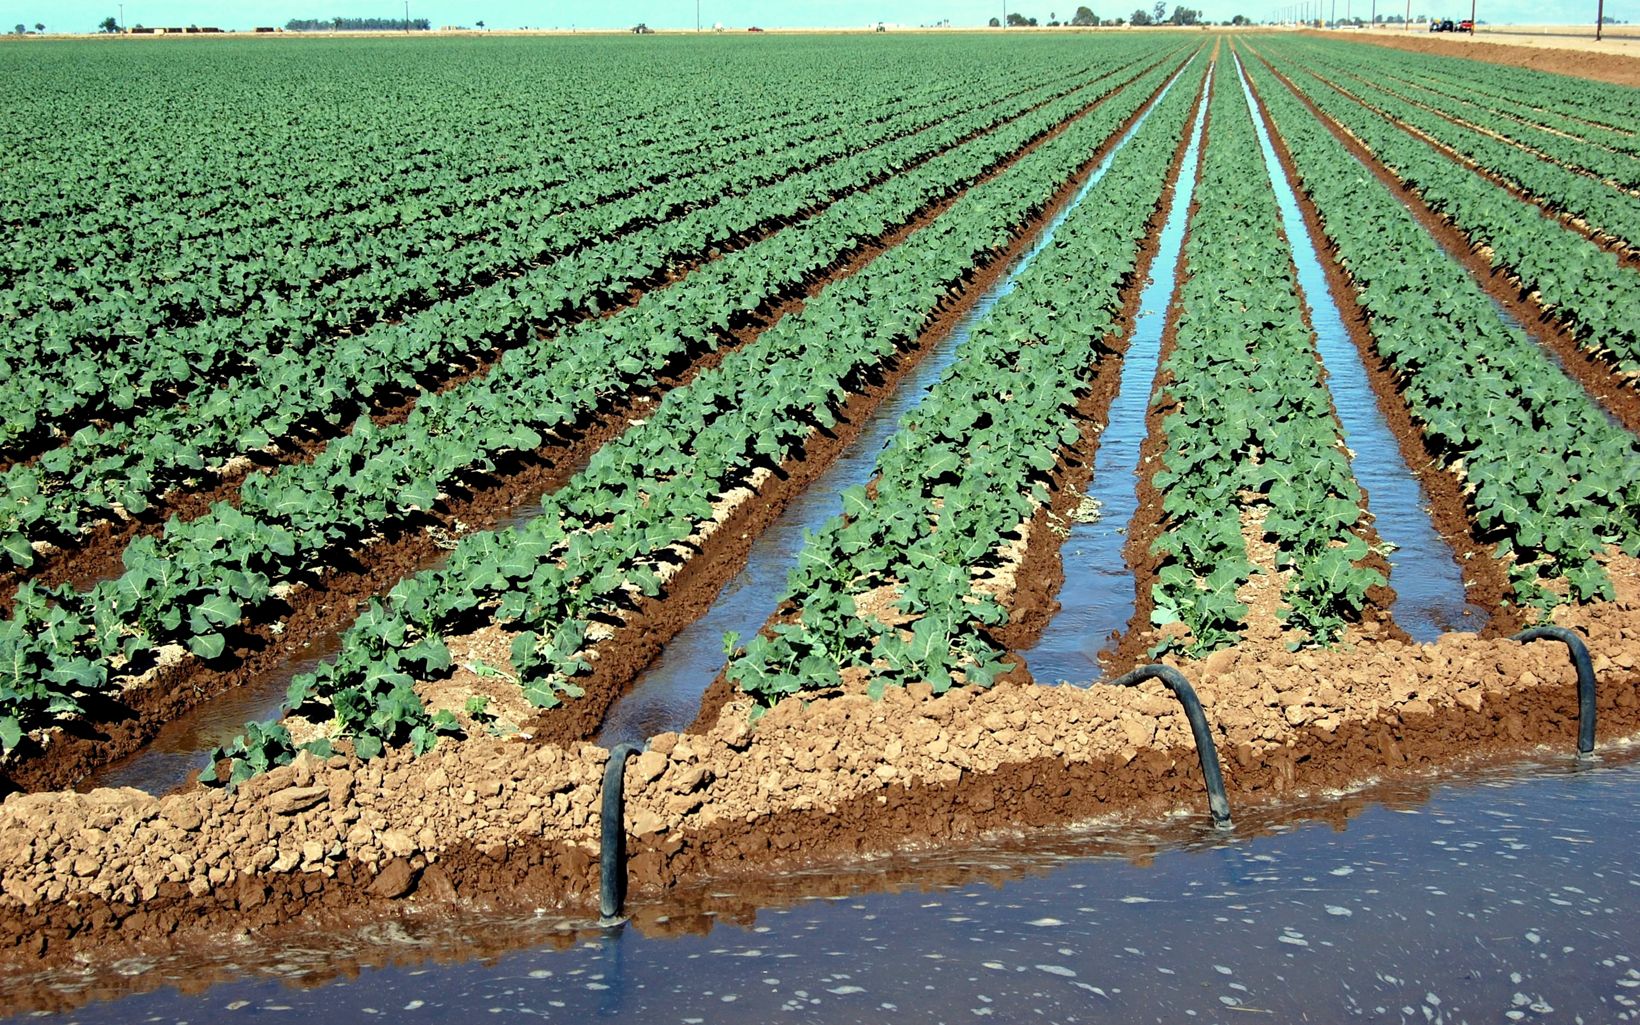 
                
                  San Diego's water agreement provides more than USD$60 million per year to farmers. A WSIP could help find more ways to reduce water use on farms and redirect saved water back to nature.
                  © Brian Richter
                
              